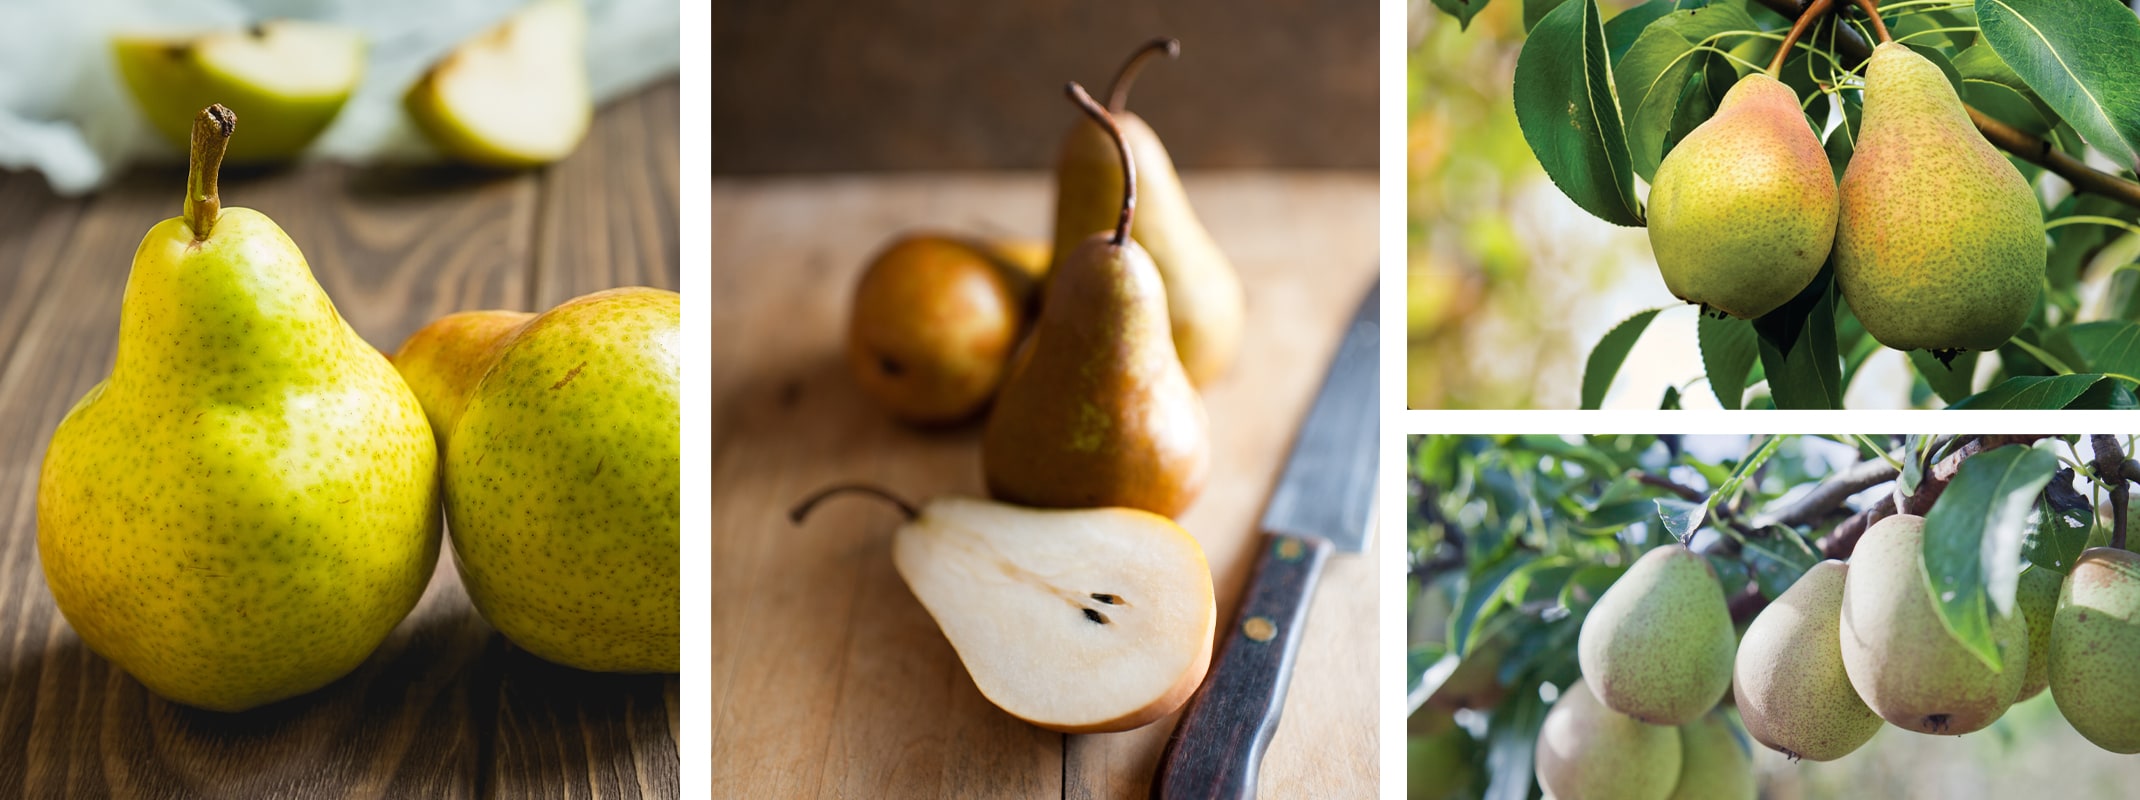 assorted pears 4 varieties to represent those found on a multi grafted pear fruit tree